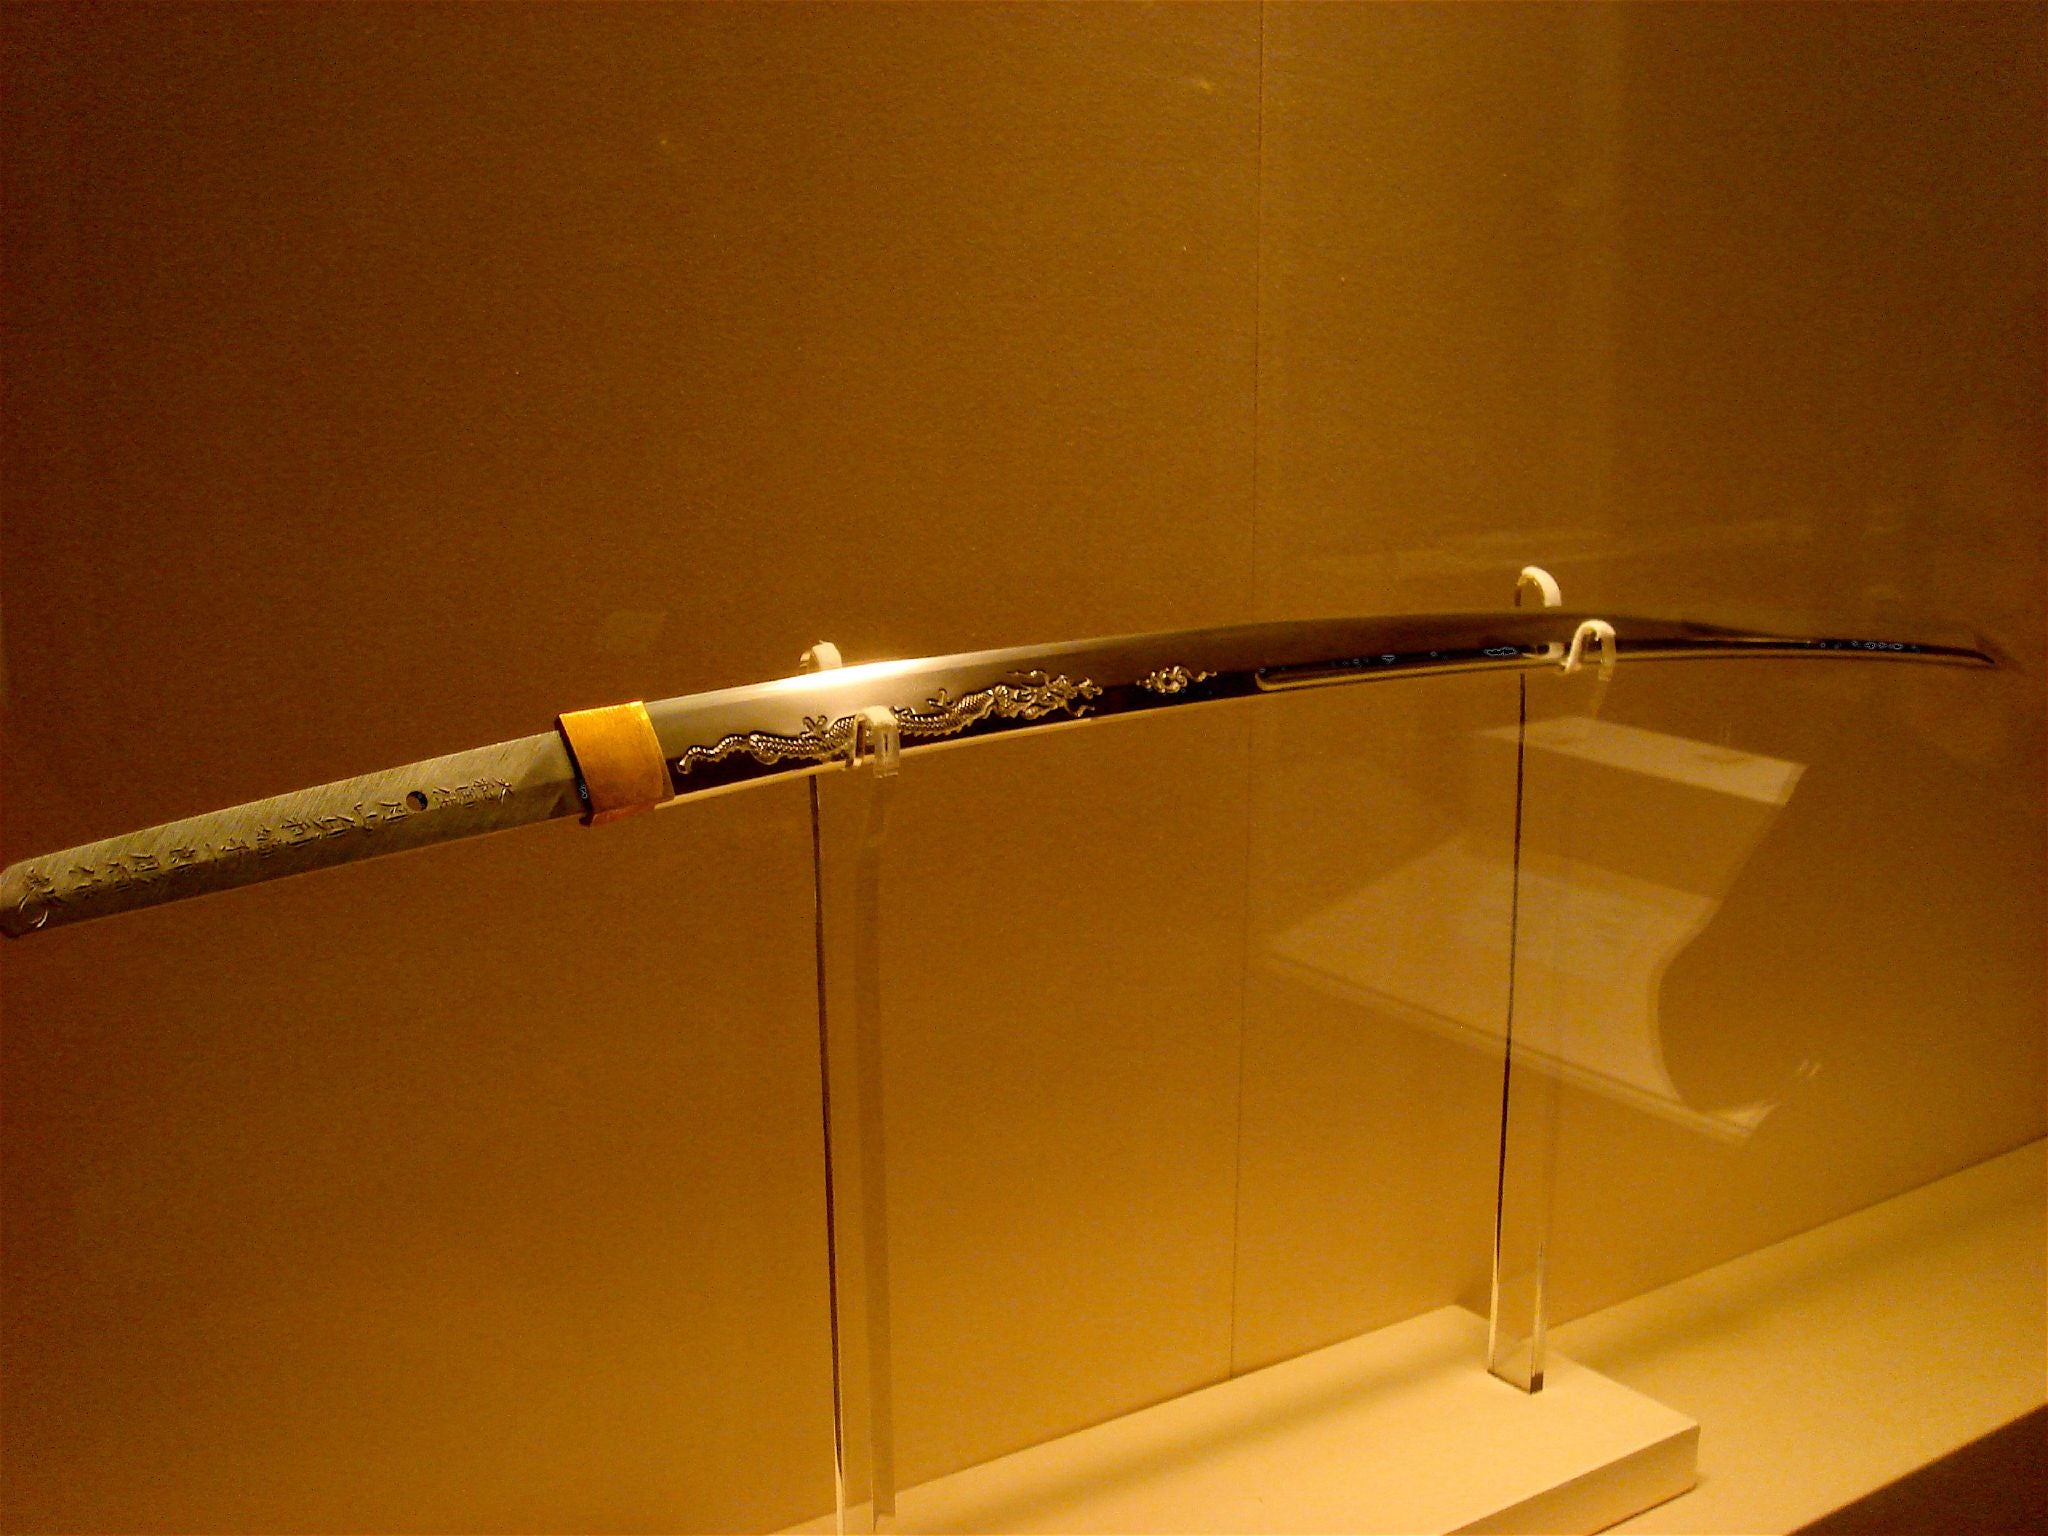 How the Mongol Invasions Influences Japanese Swordmaking